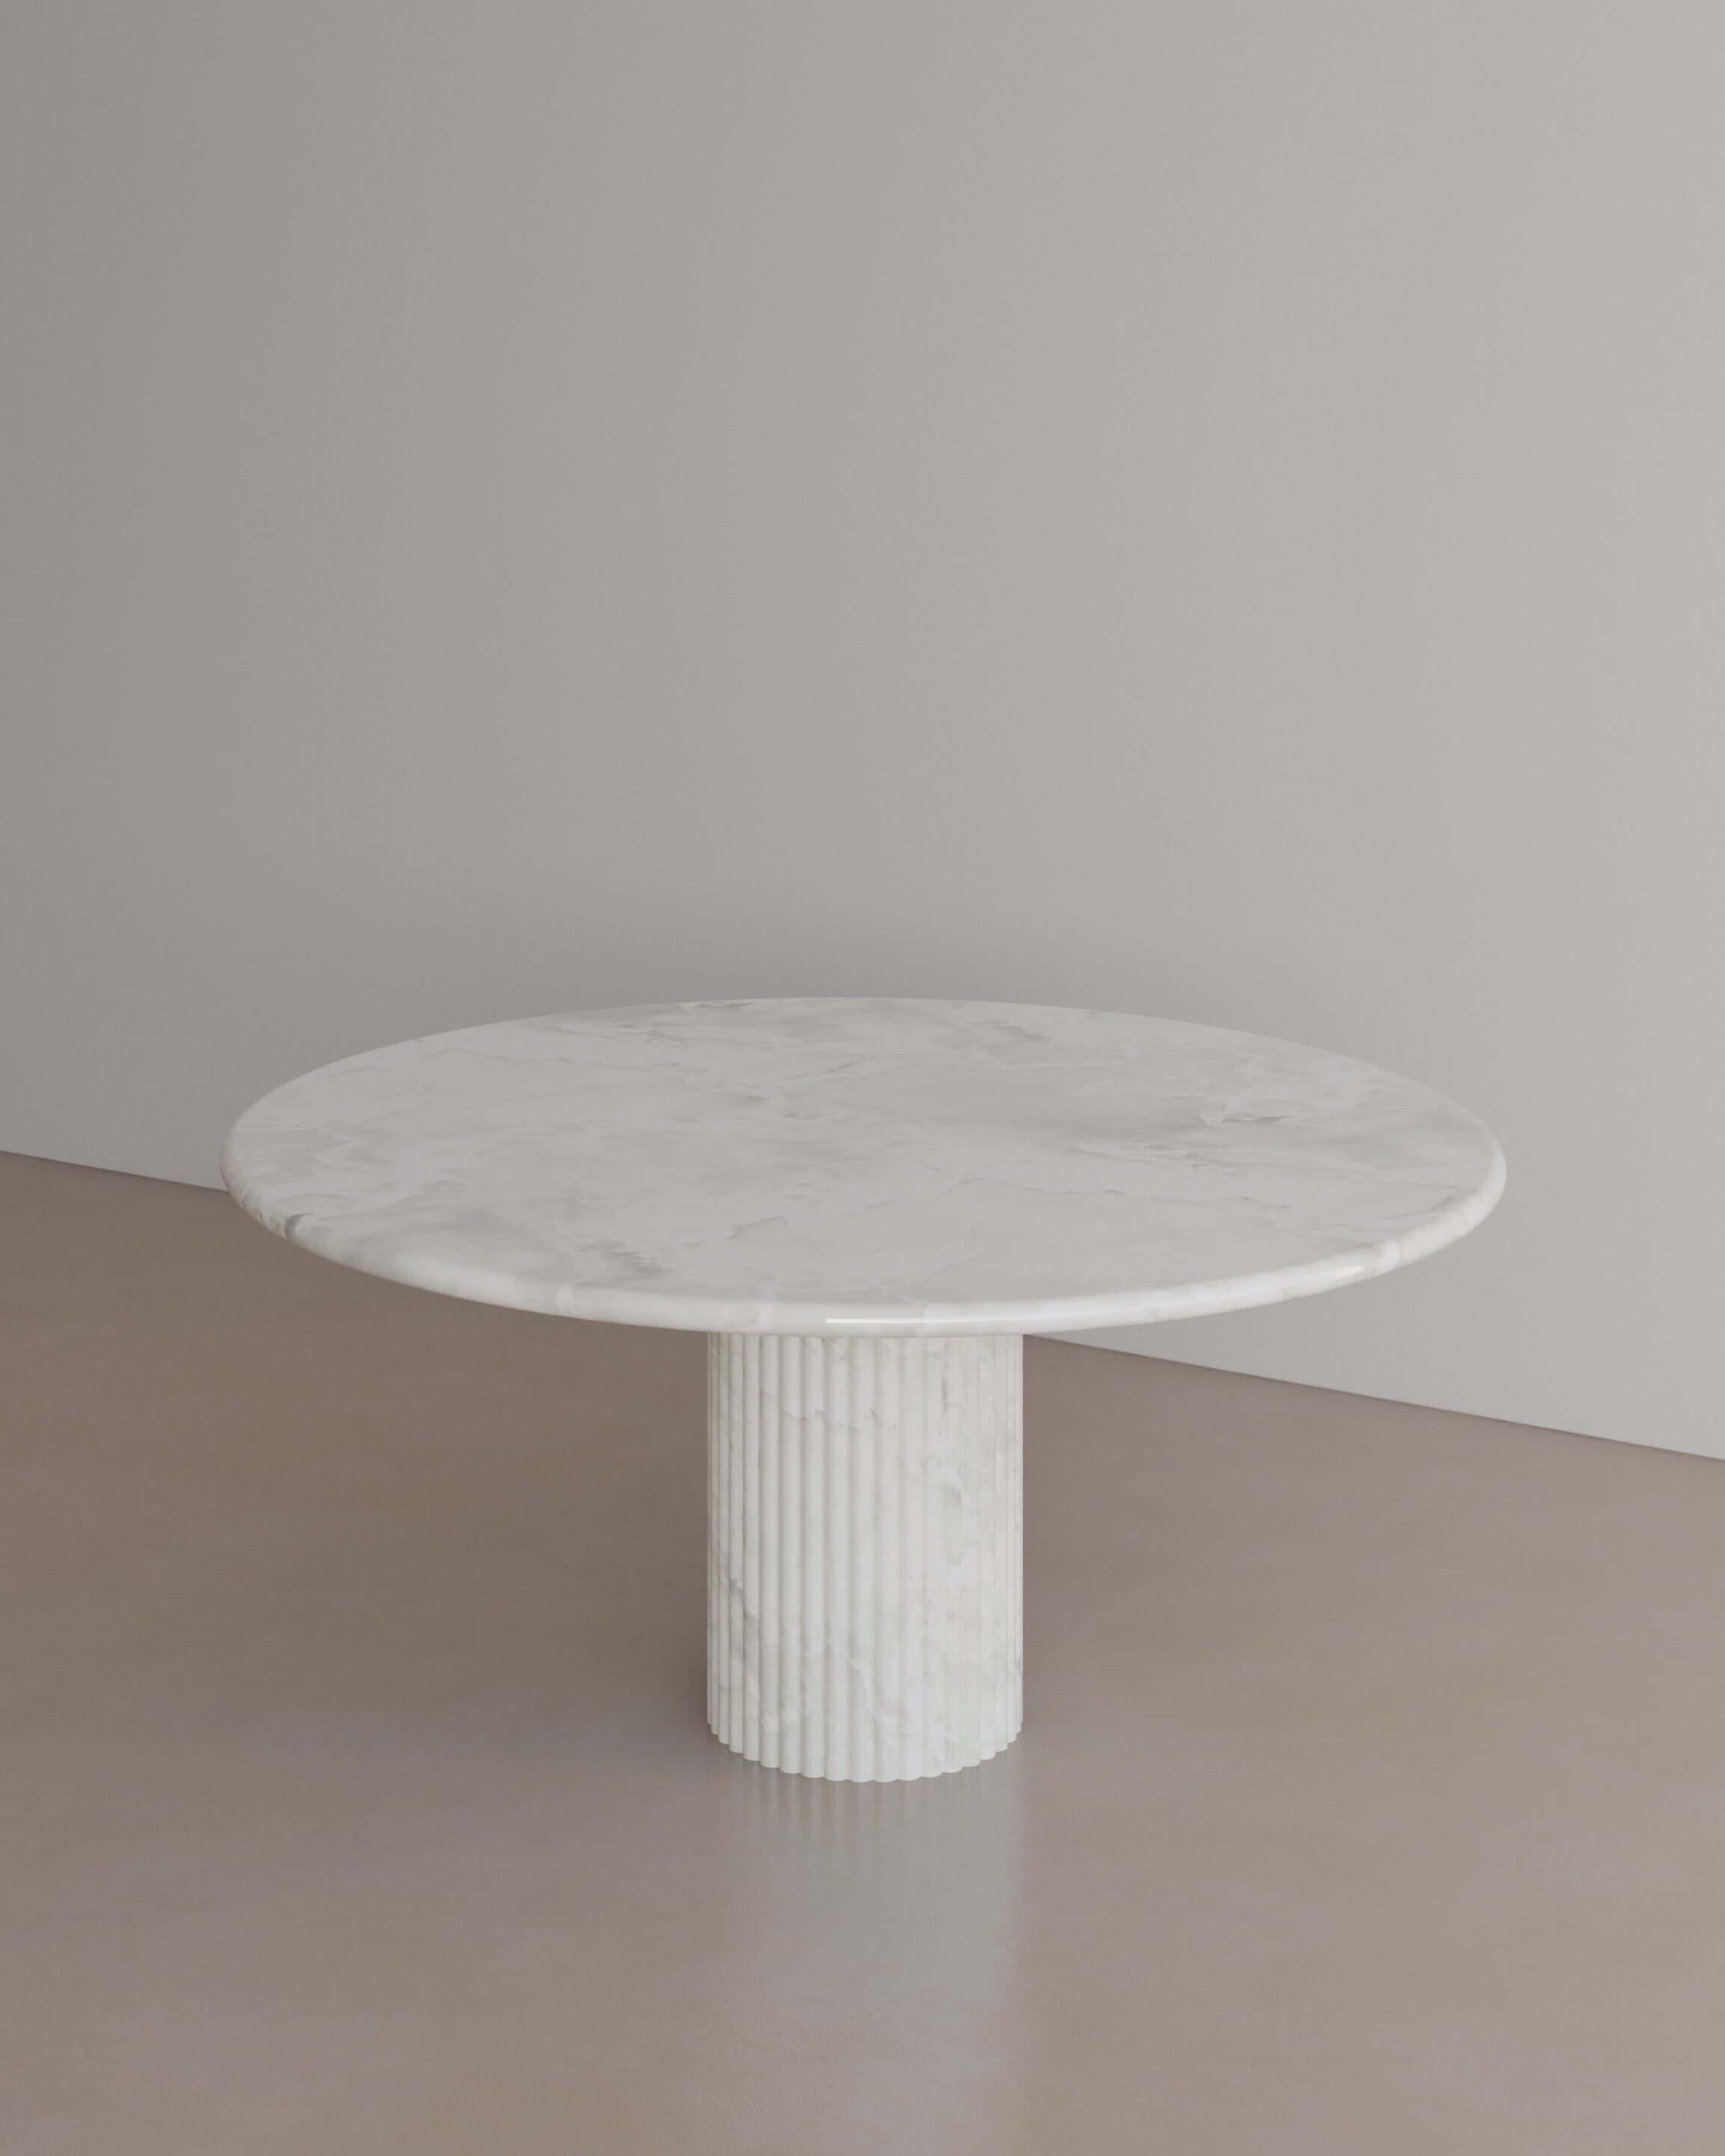 The Essentialist brings you The Antica Dining Table I in Calacatta Viola Marble . An oval table top resolved by smooth bullnose edges rests on two supporting pillars. Architectural form is refined by artistic expression echoing Roman culture. This